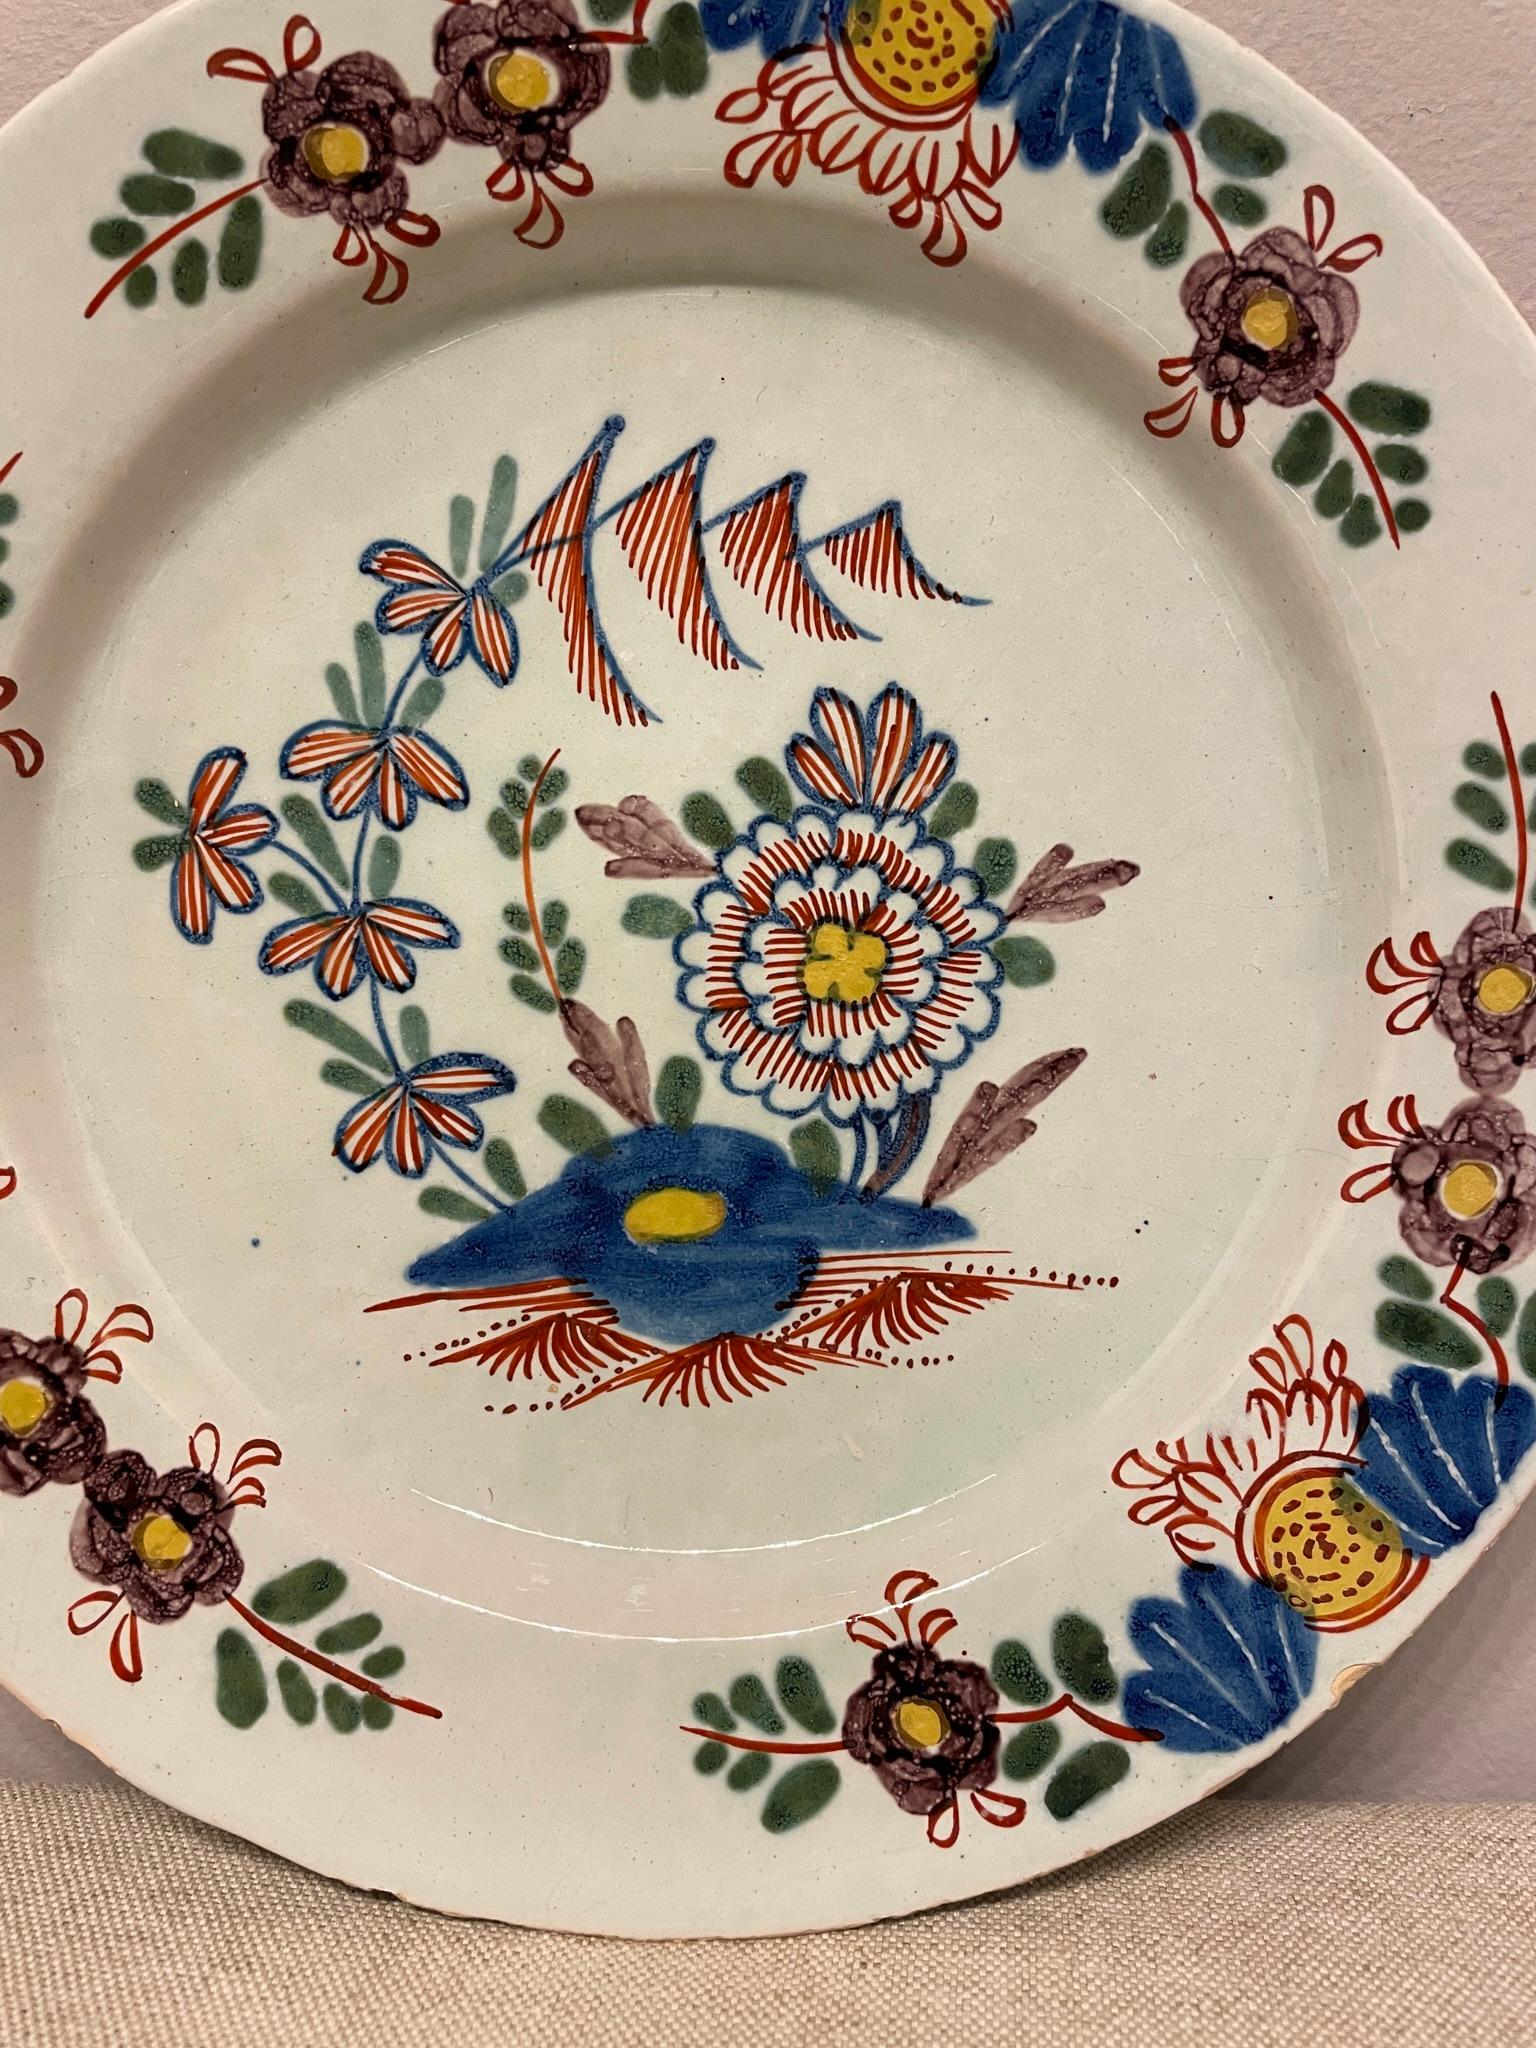 A good 18th Century English Delft Polychrome plate with great colors. Typical wear for this type of plates. Chips on the rim . No hairline no restoration noted, There are some edge flakes typical of Delft plates from this period of time.
Dimensions